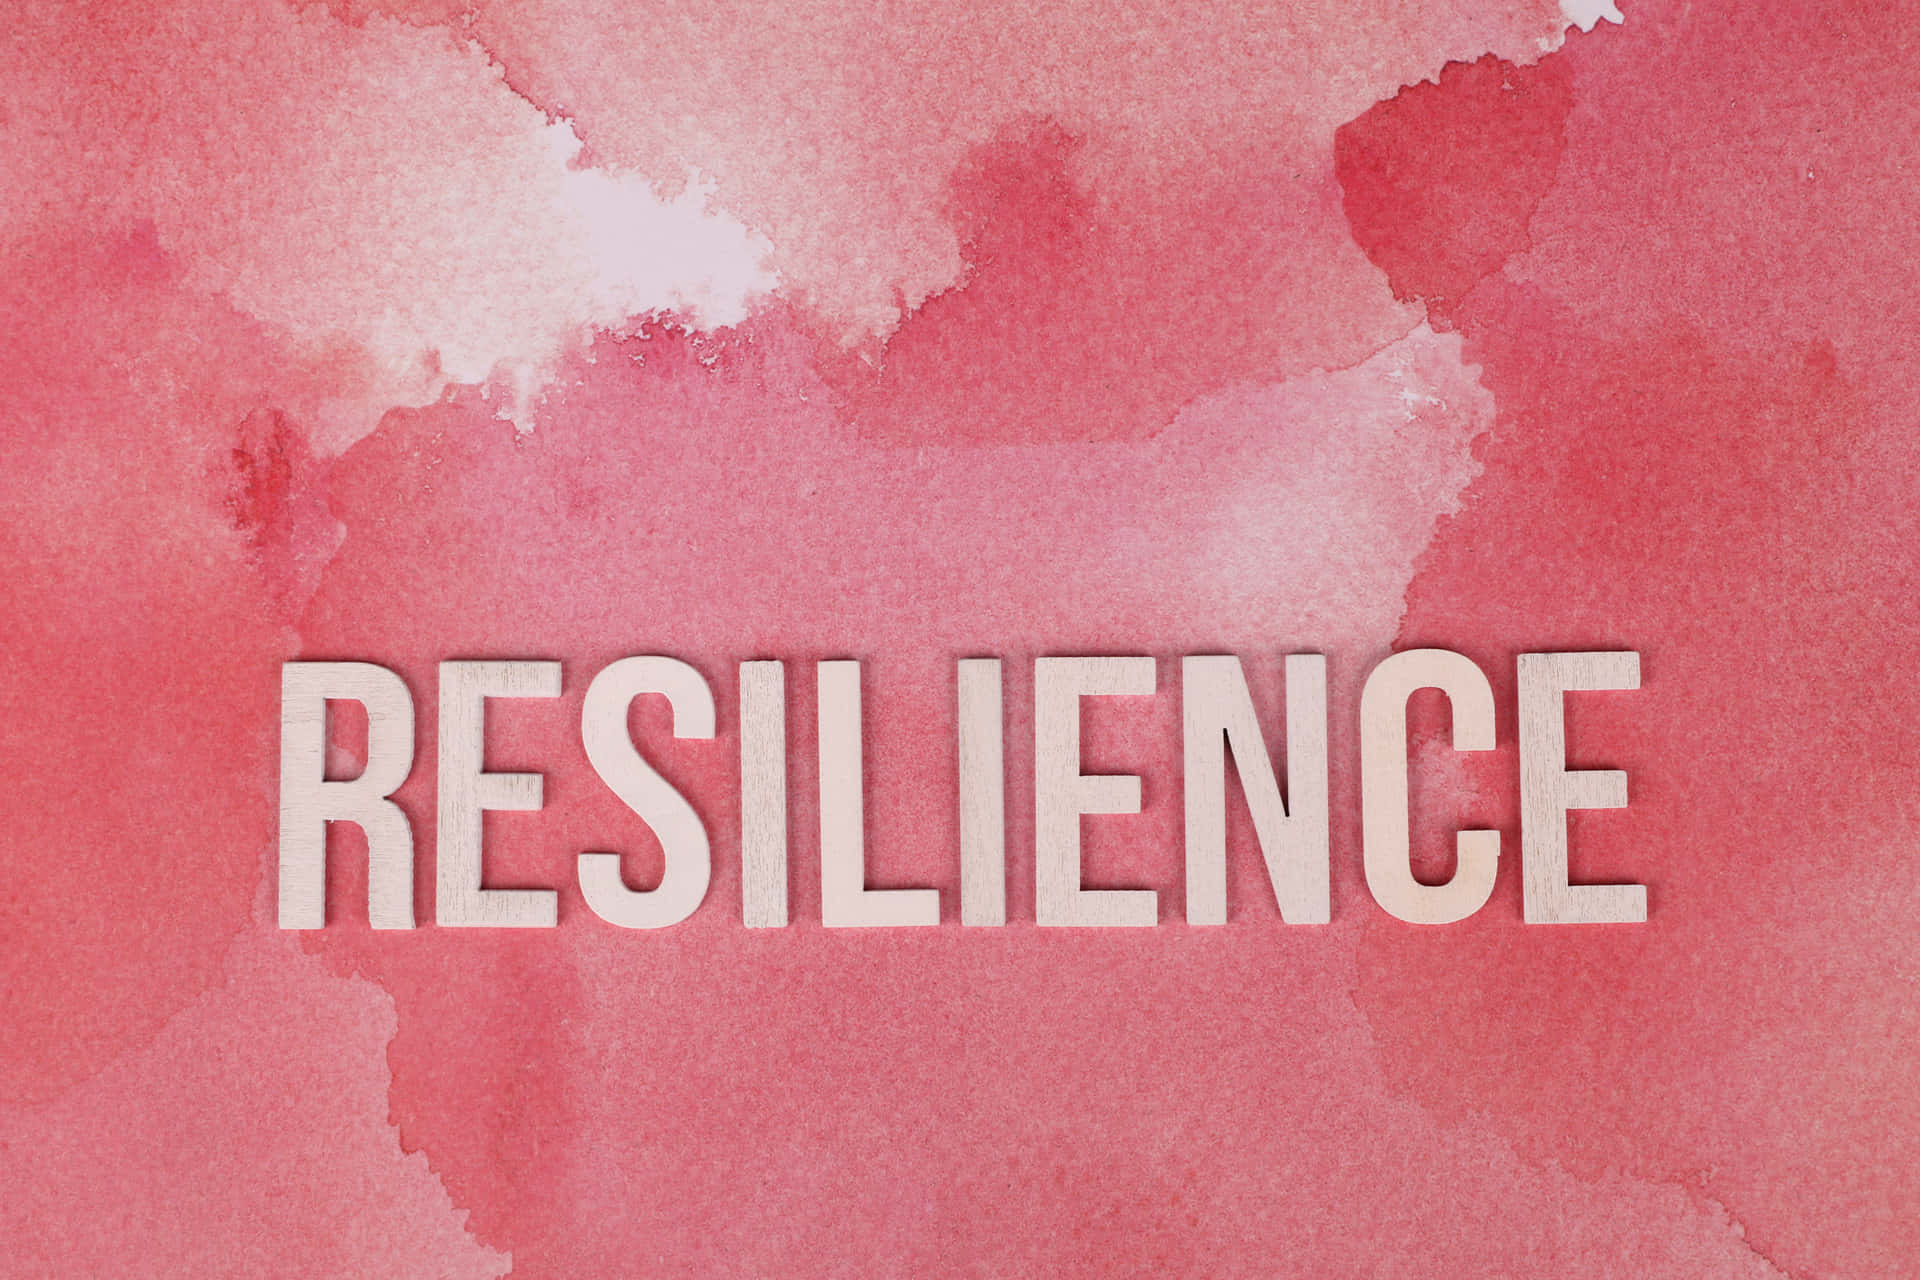 The Sign That Reminds People To Be Resilient Wallpaper